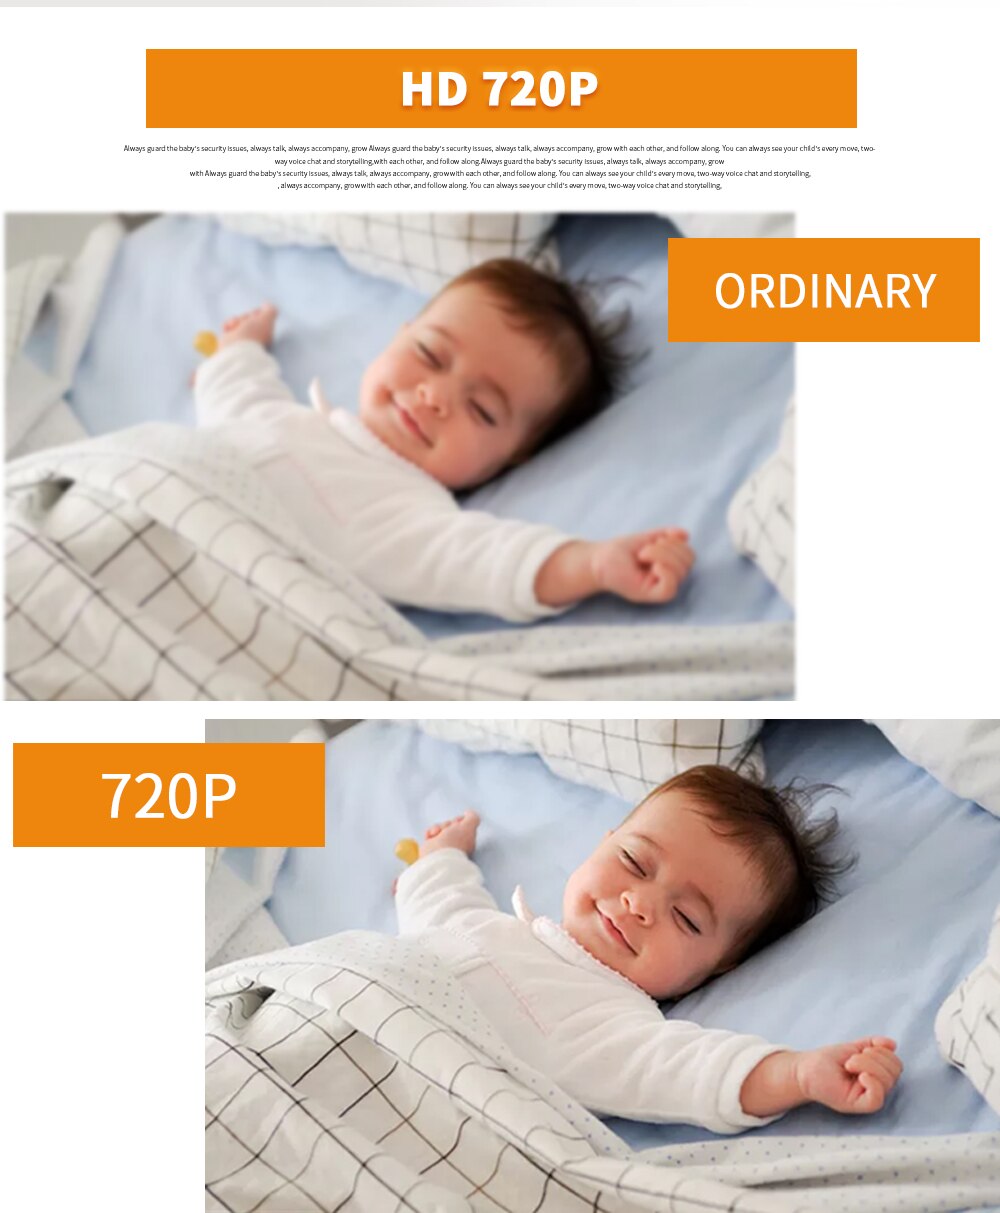 Night Vision Temperature Sleeping Monitor Wireless Video Color Baby Monitor 3.2 inch High Resolution Baby Nanny Security Camera